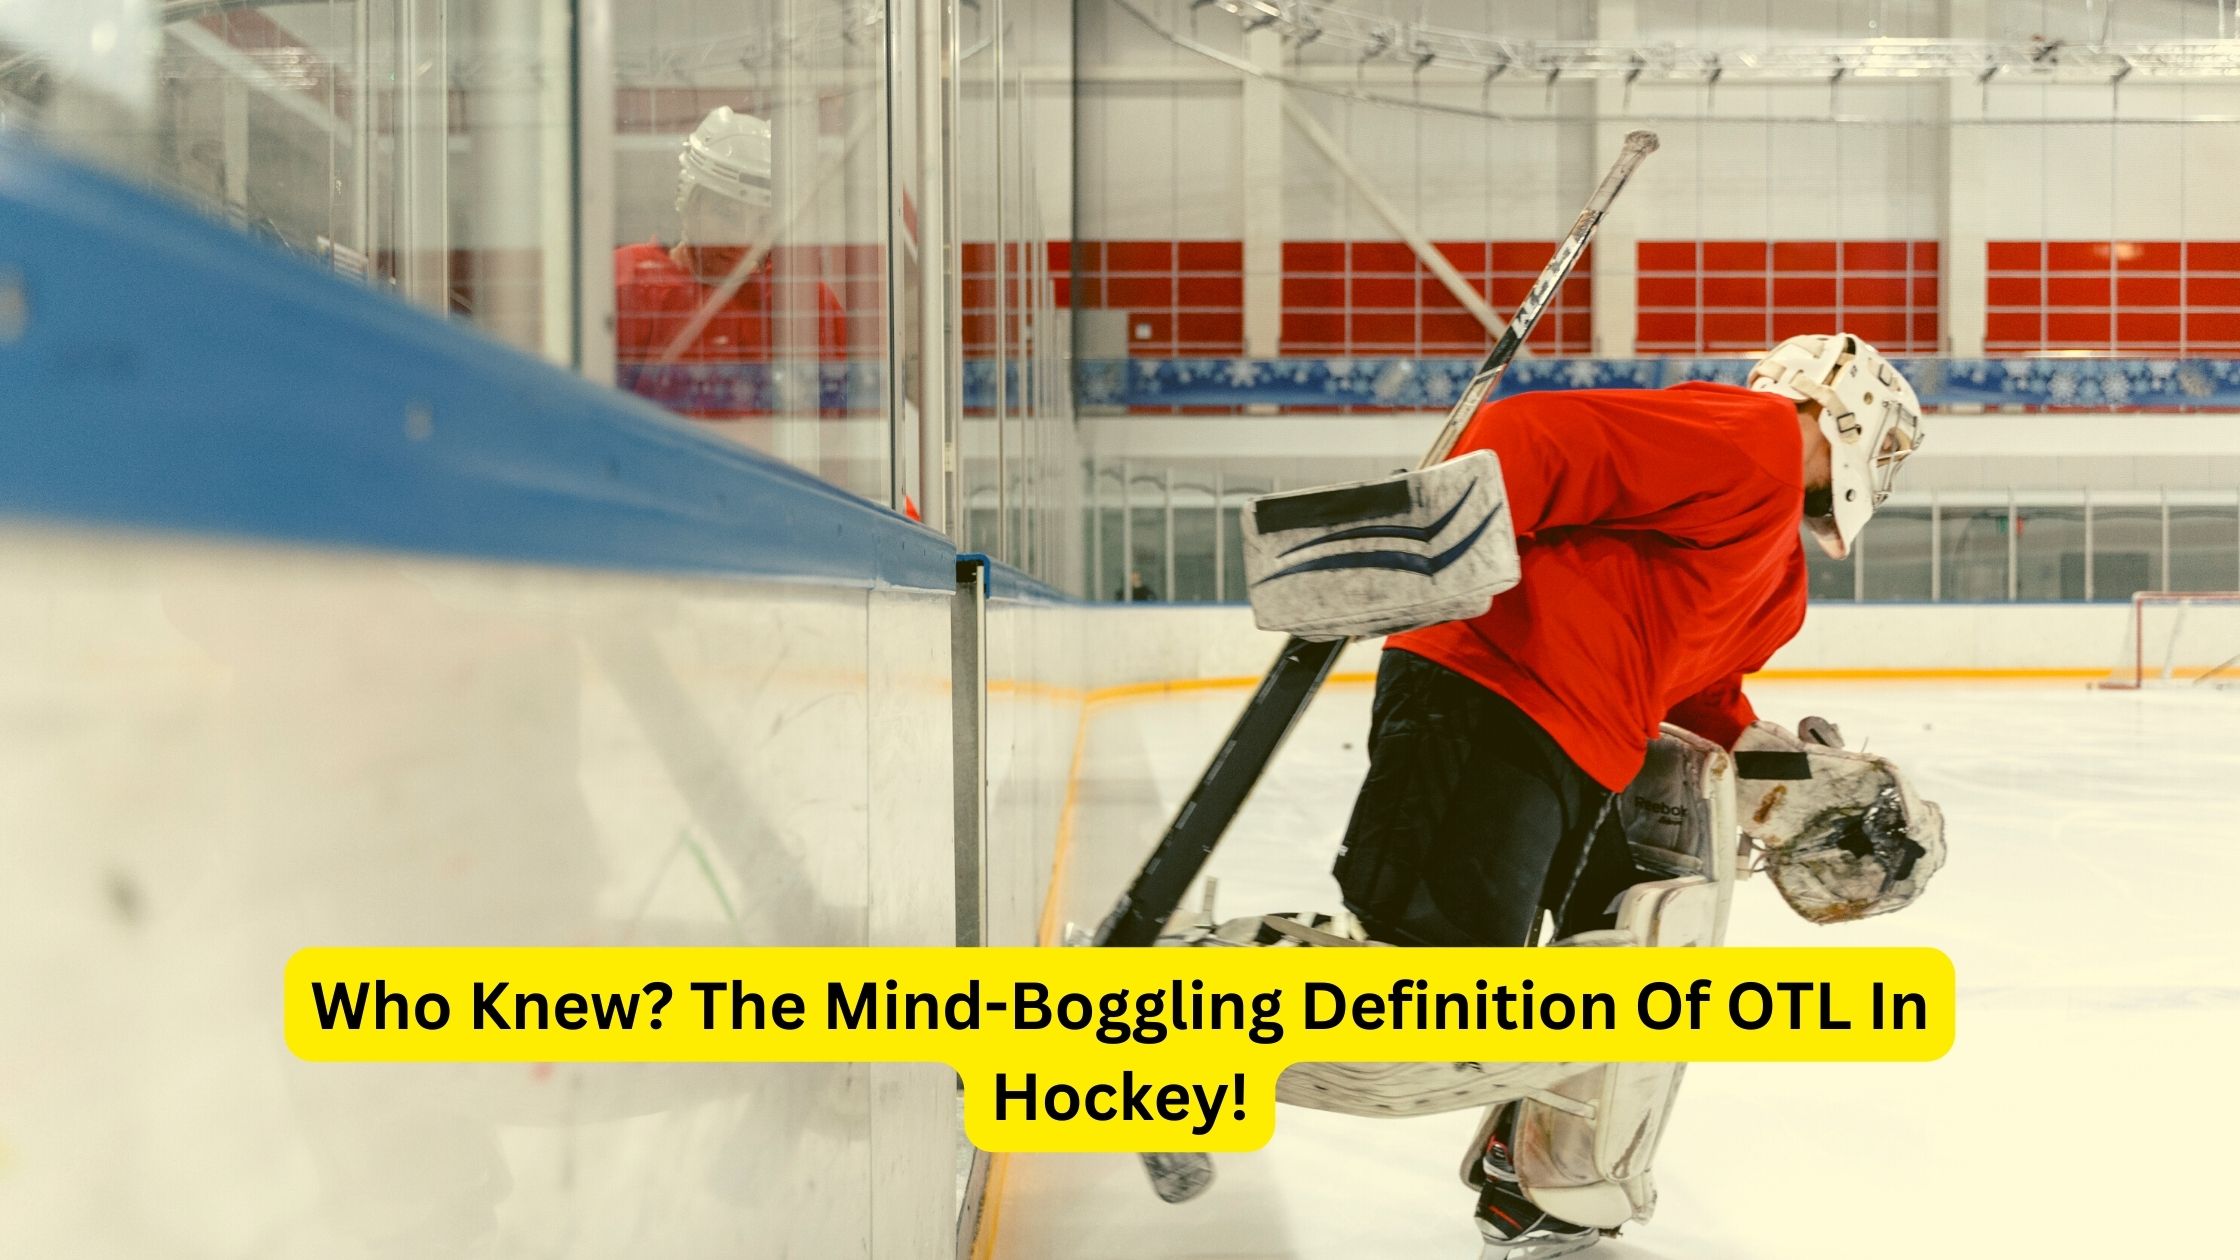 Who Knew? The Mind-Boggling Definition Of OTL In Hockey!